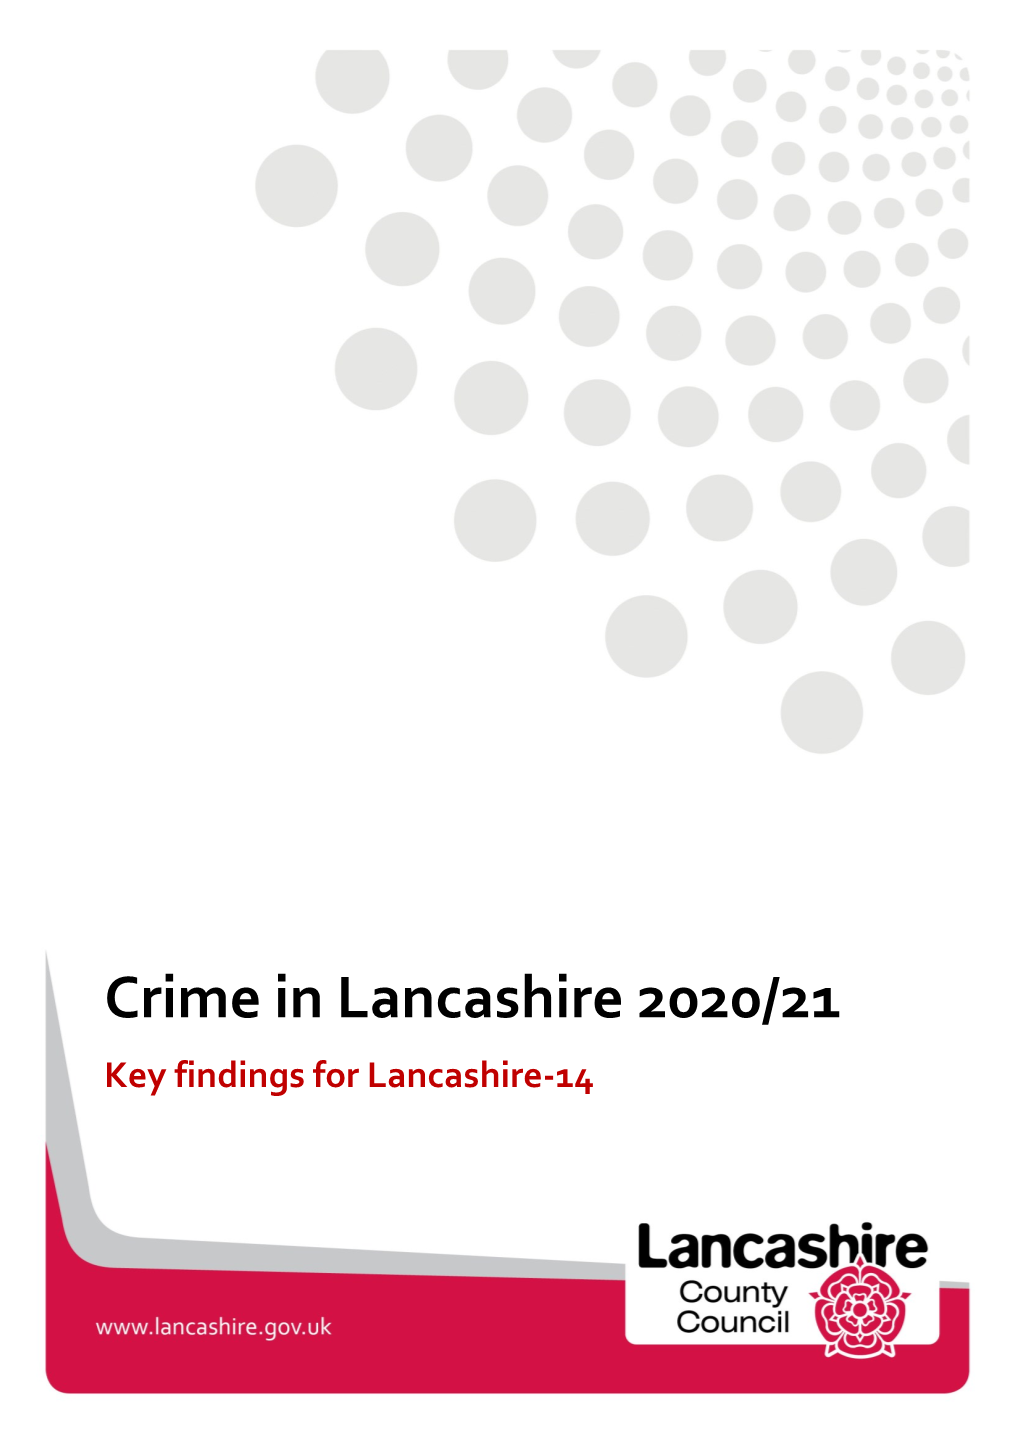 Crime in Lancashire 2020/21 Key Findings for Lancashire-14